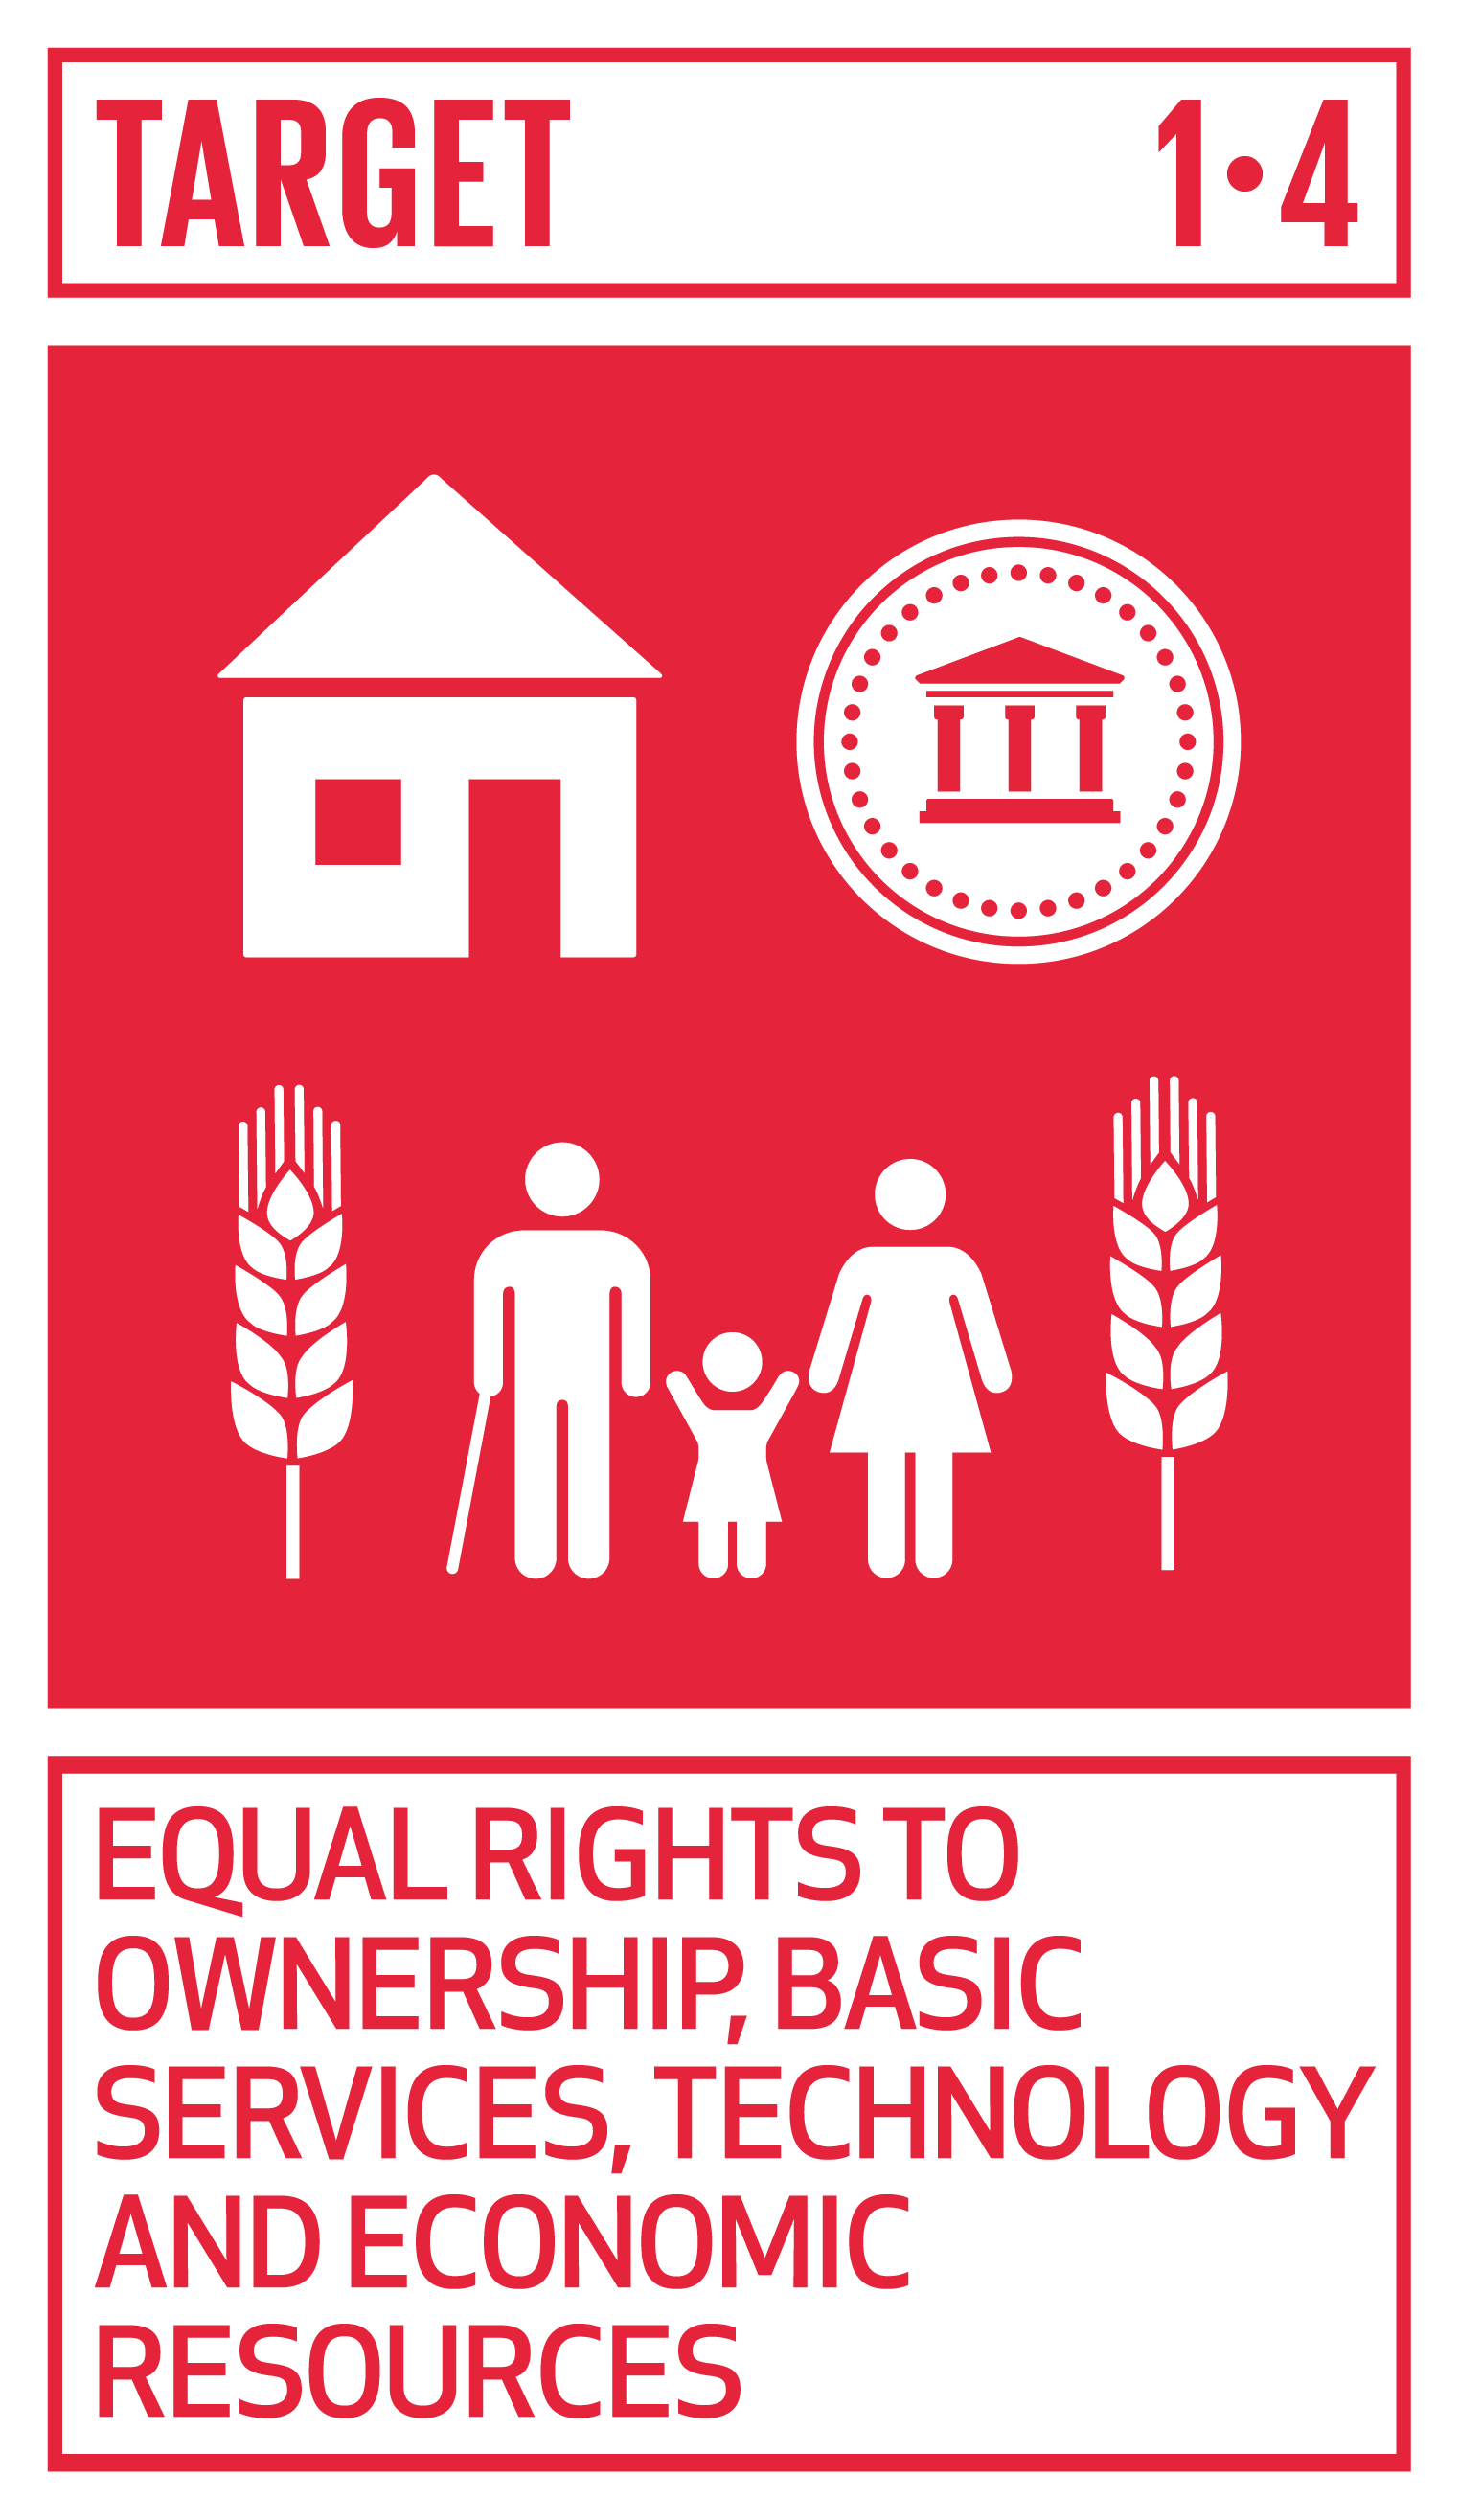 https://ocm.iccrom.org/sdgs/sdg-1-no-poverty/sdg-14-equal-rights-ownership-basic-services-technology-and-economic